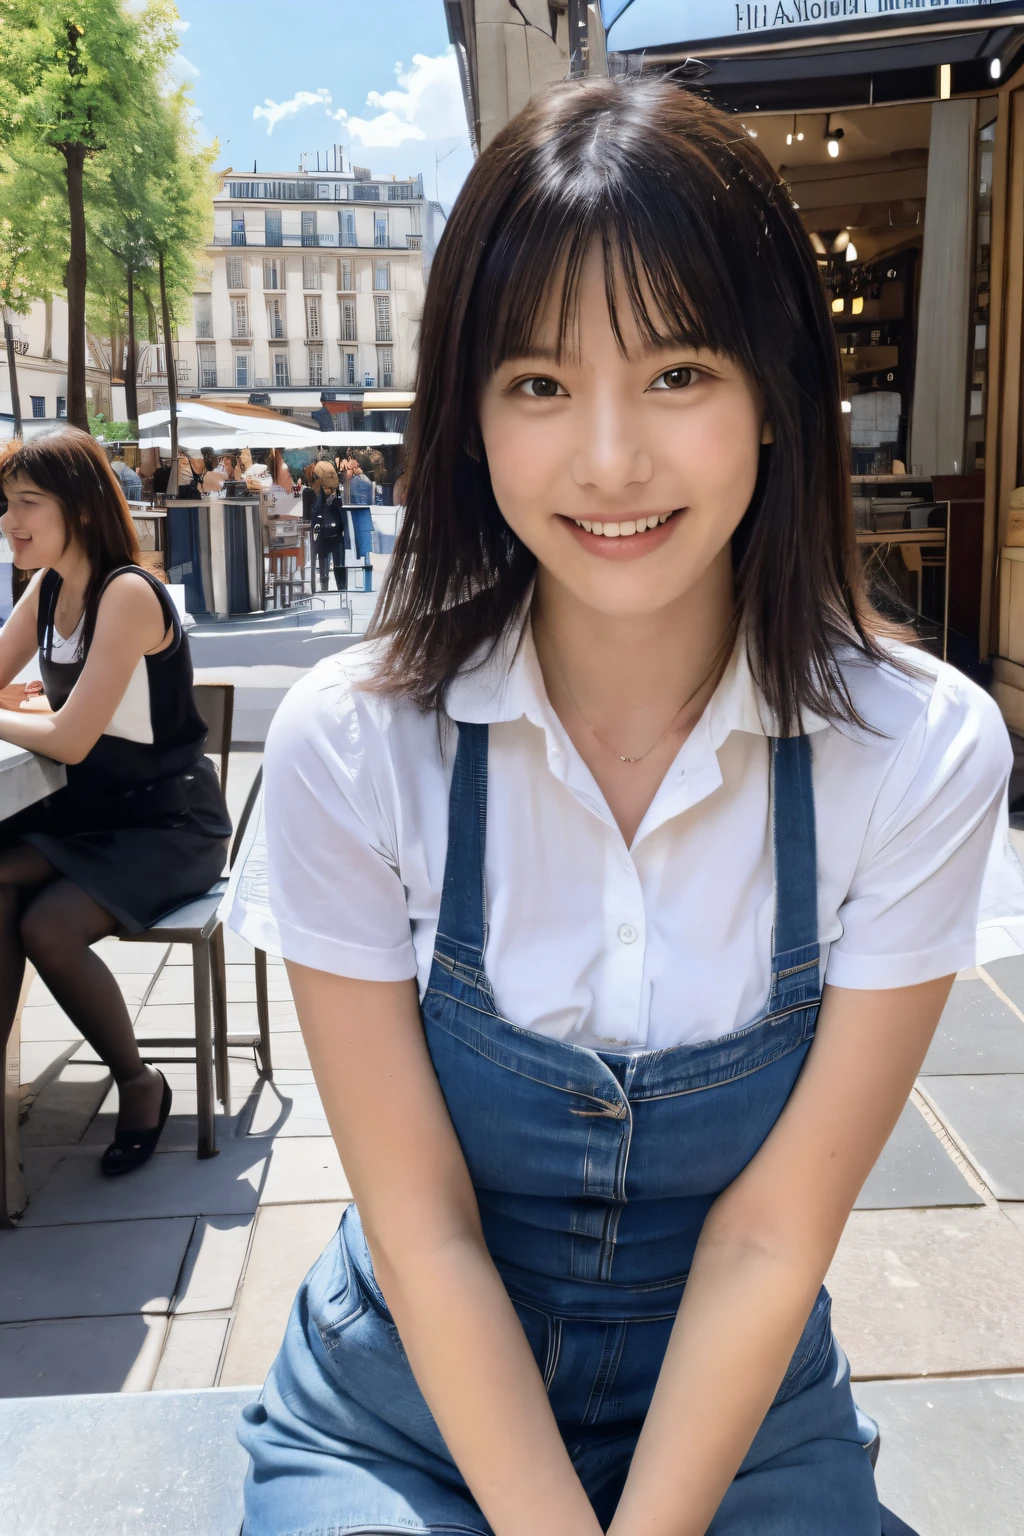 Ultra high-definition images,1 girl,(Black hair semi-long)(Beautiful hair), actress, Smile, Shiny skin, Best Quality, masutepiece, (Photorealistic:1.4), Terrace seating, ue, France, Paris, Denim Mini Skirt (Realistic fabric), short white sleeves (Cotton fabric), (No logo), A cafe on a hill with a view of the Arc de Triomphe in the distance,terrace smiling